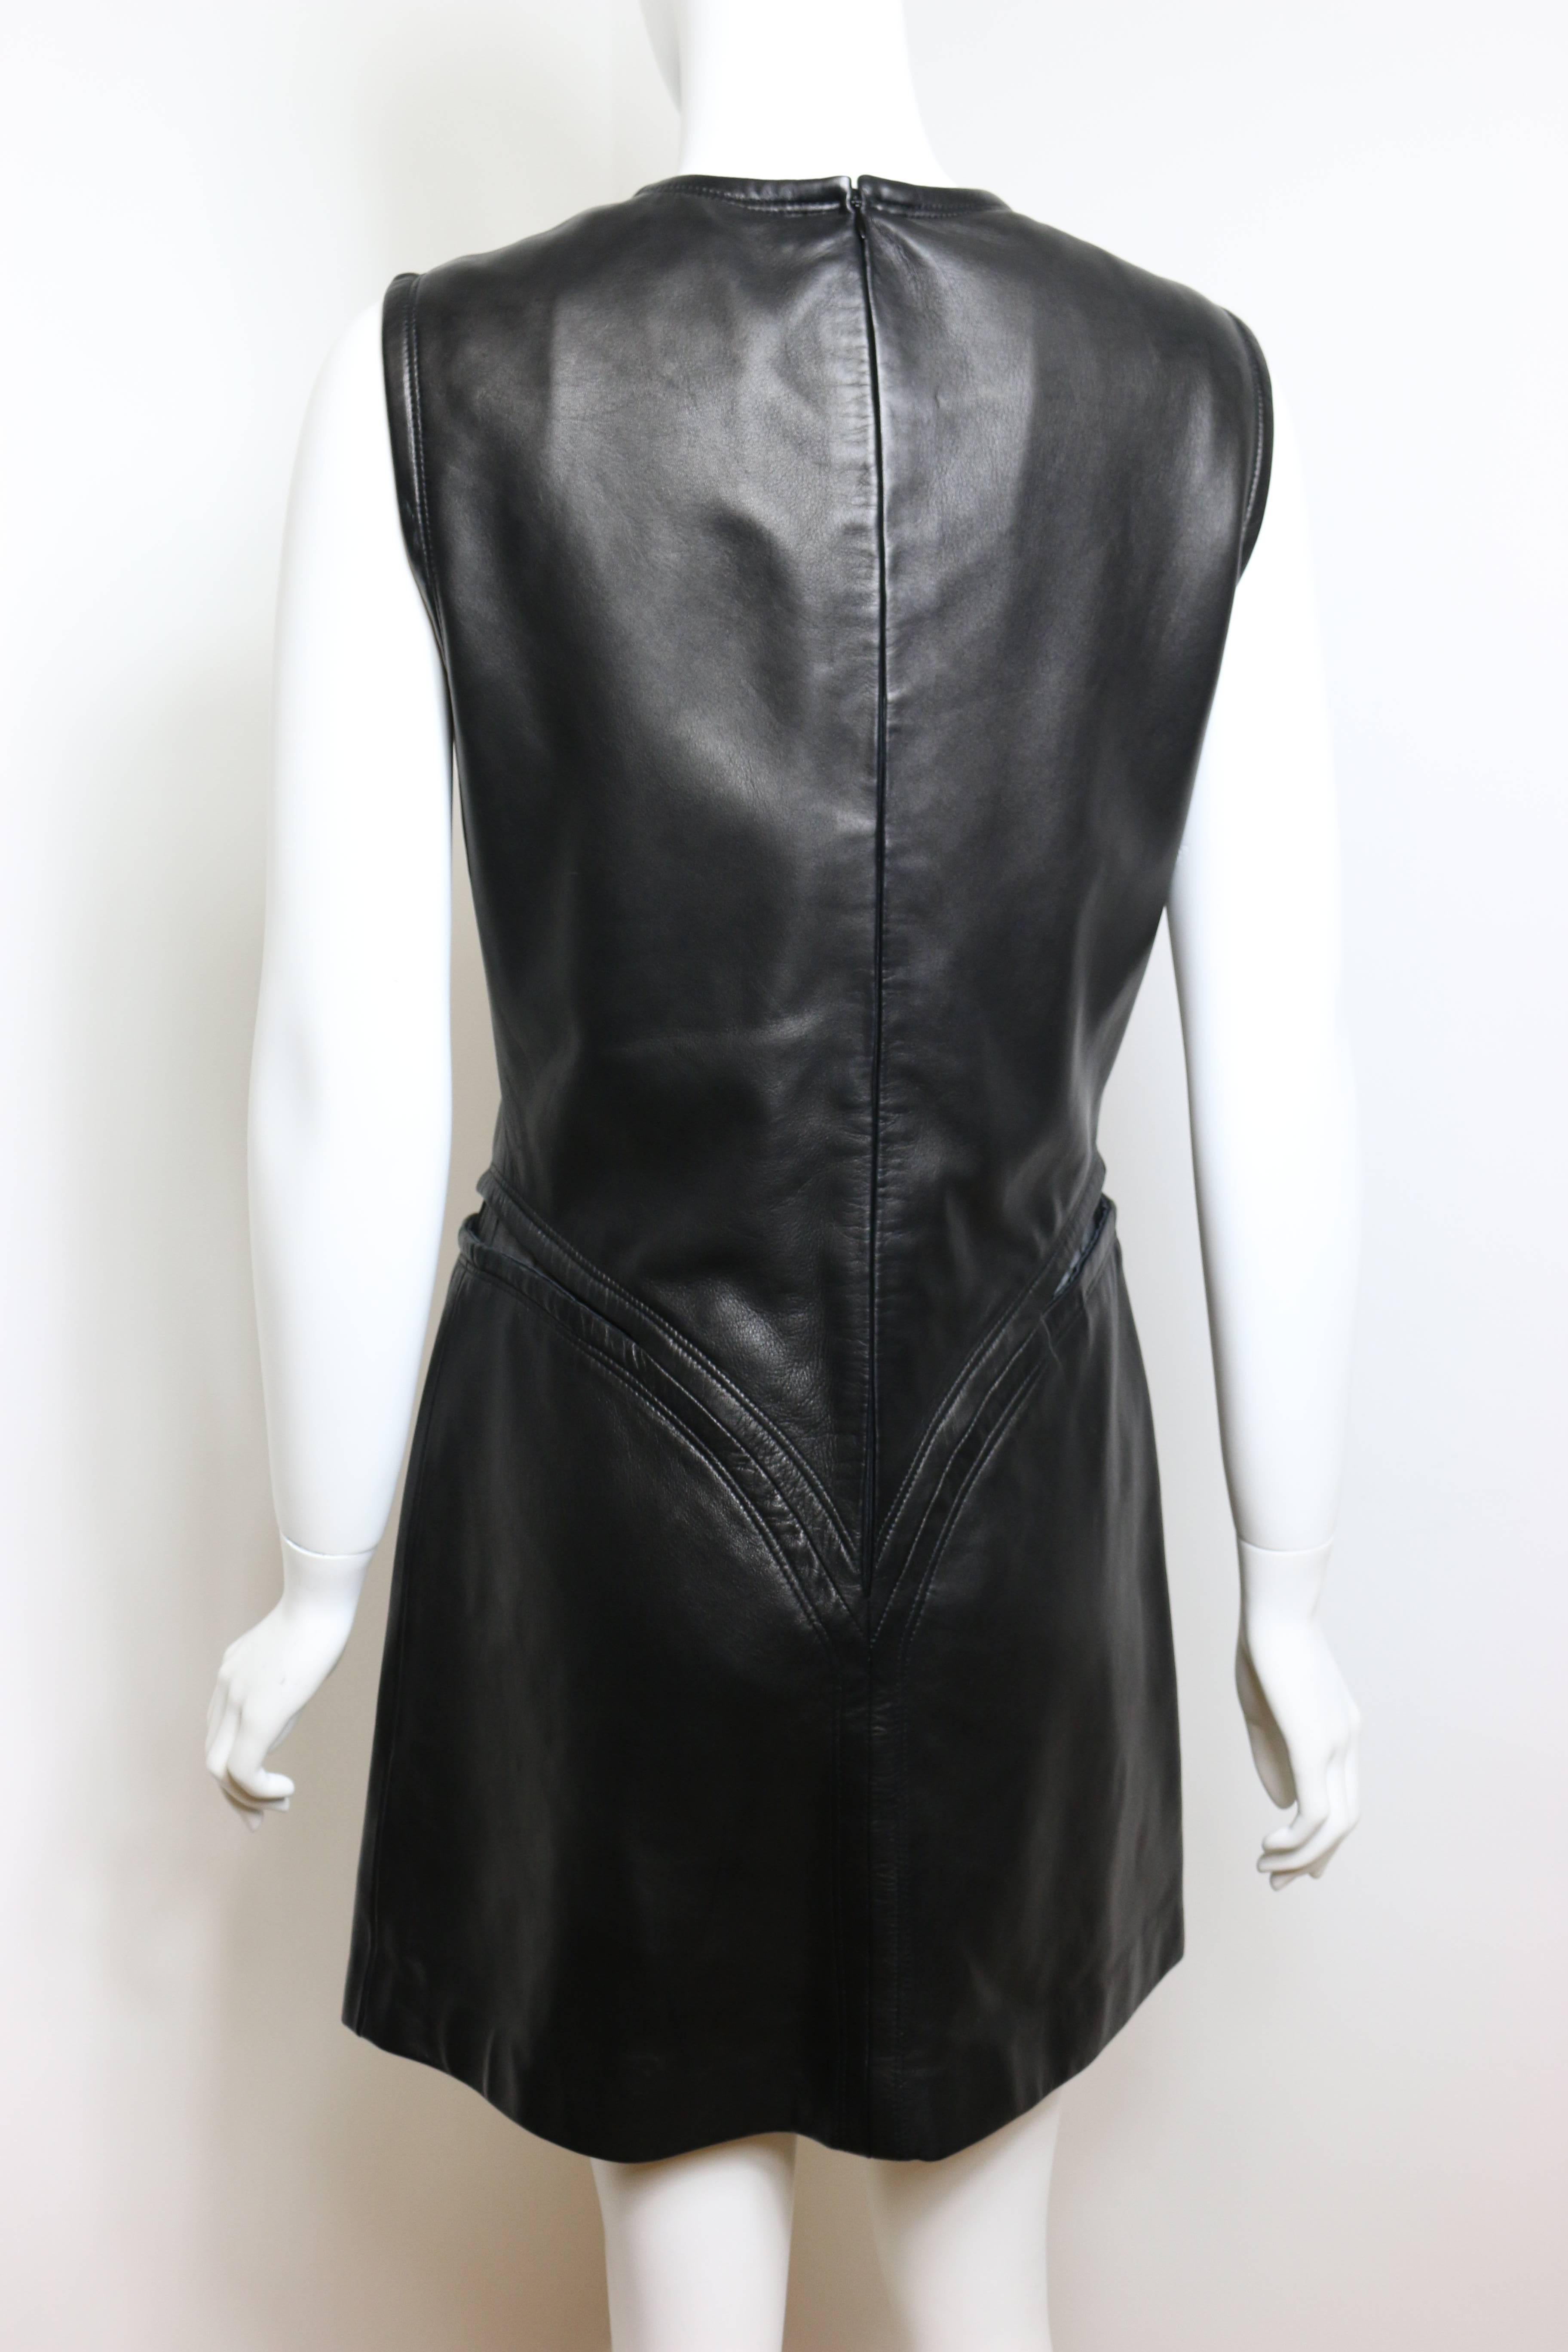 Gianni Versace Cutout Black Leather Dress  For Sale 1